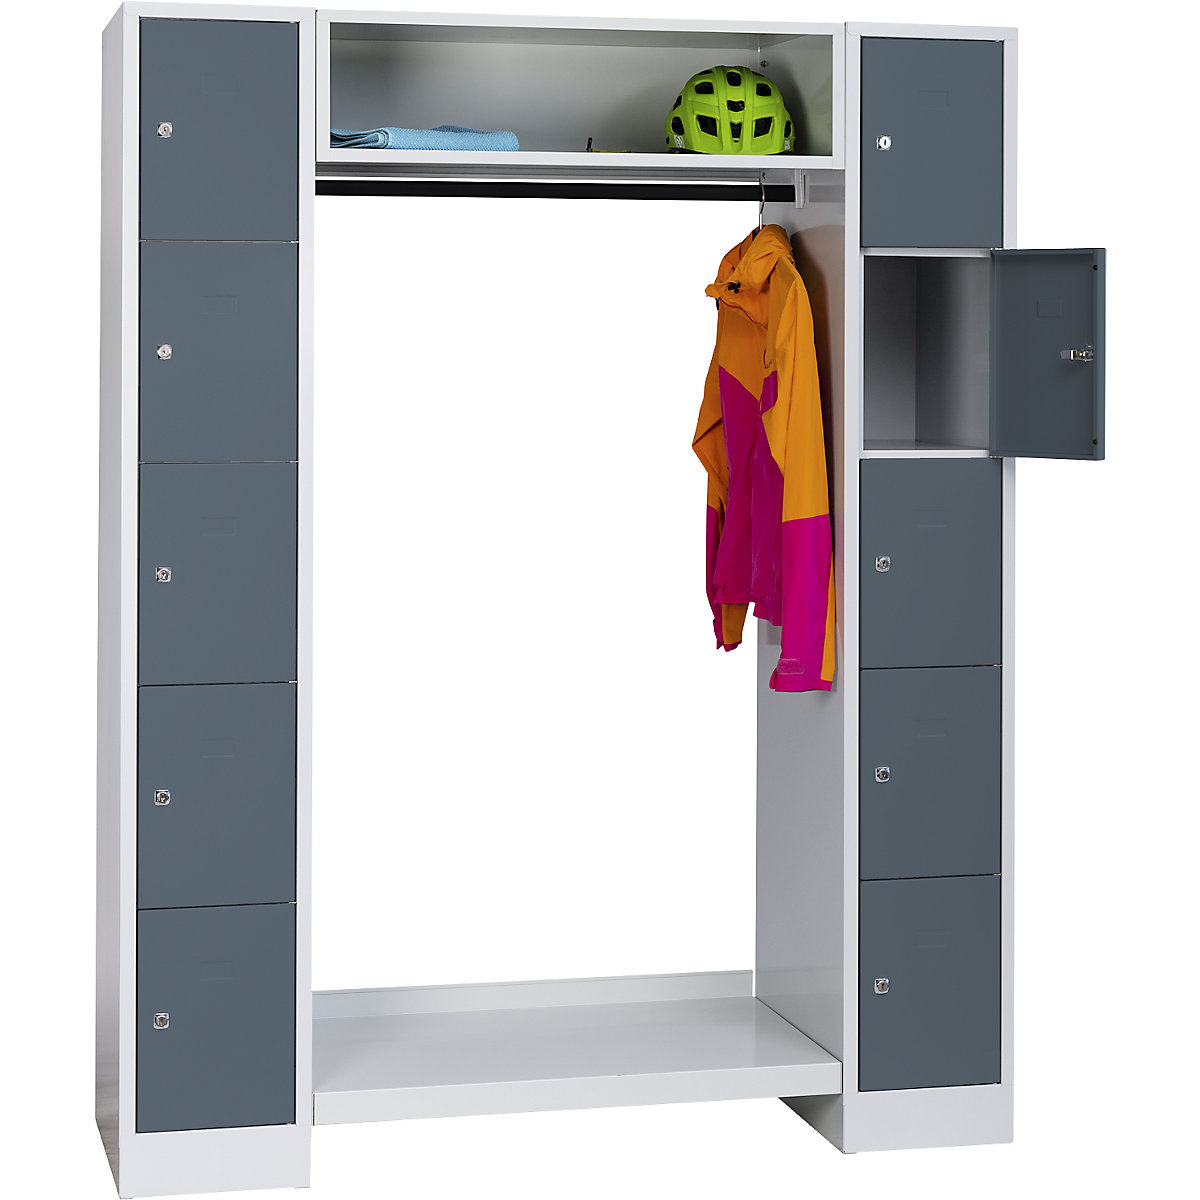 Cloakroom locker system – Wolf, 10 compartments on the outside, 10 coat hangers, overall width 1470 mm, compartment width 298 mm, basalt grey/light grey-5